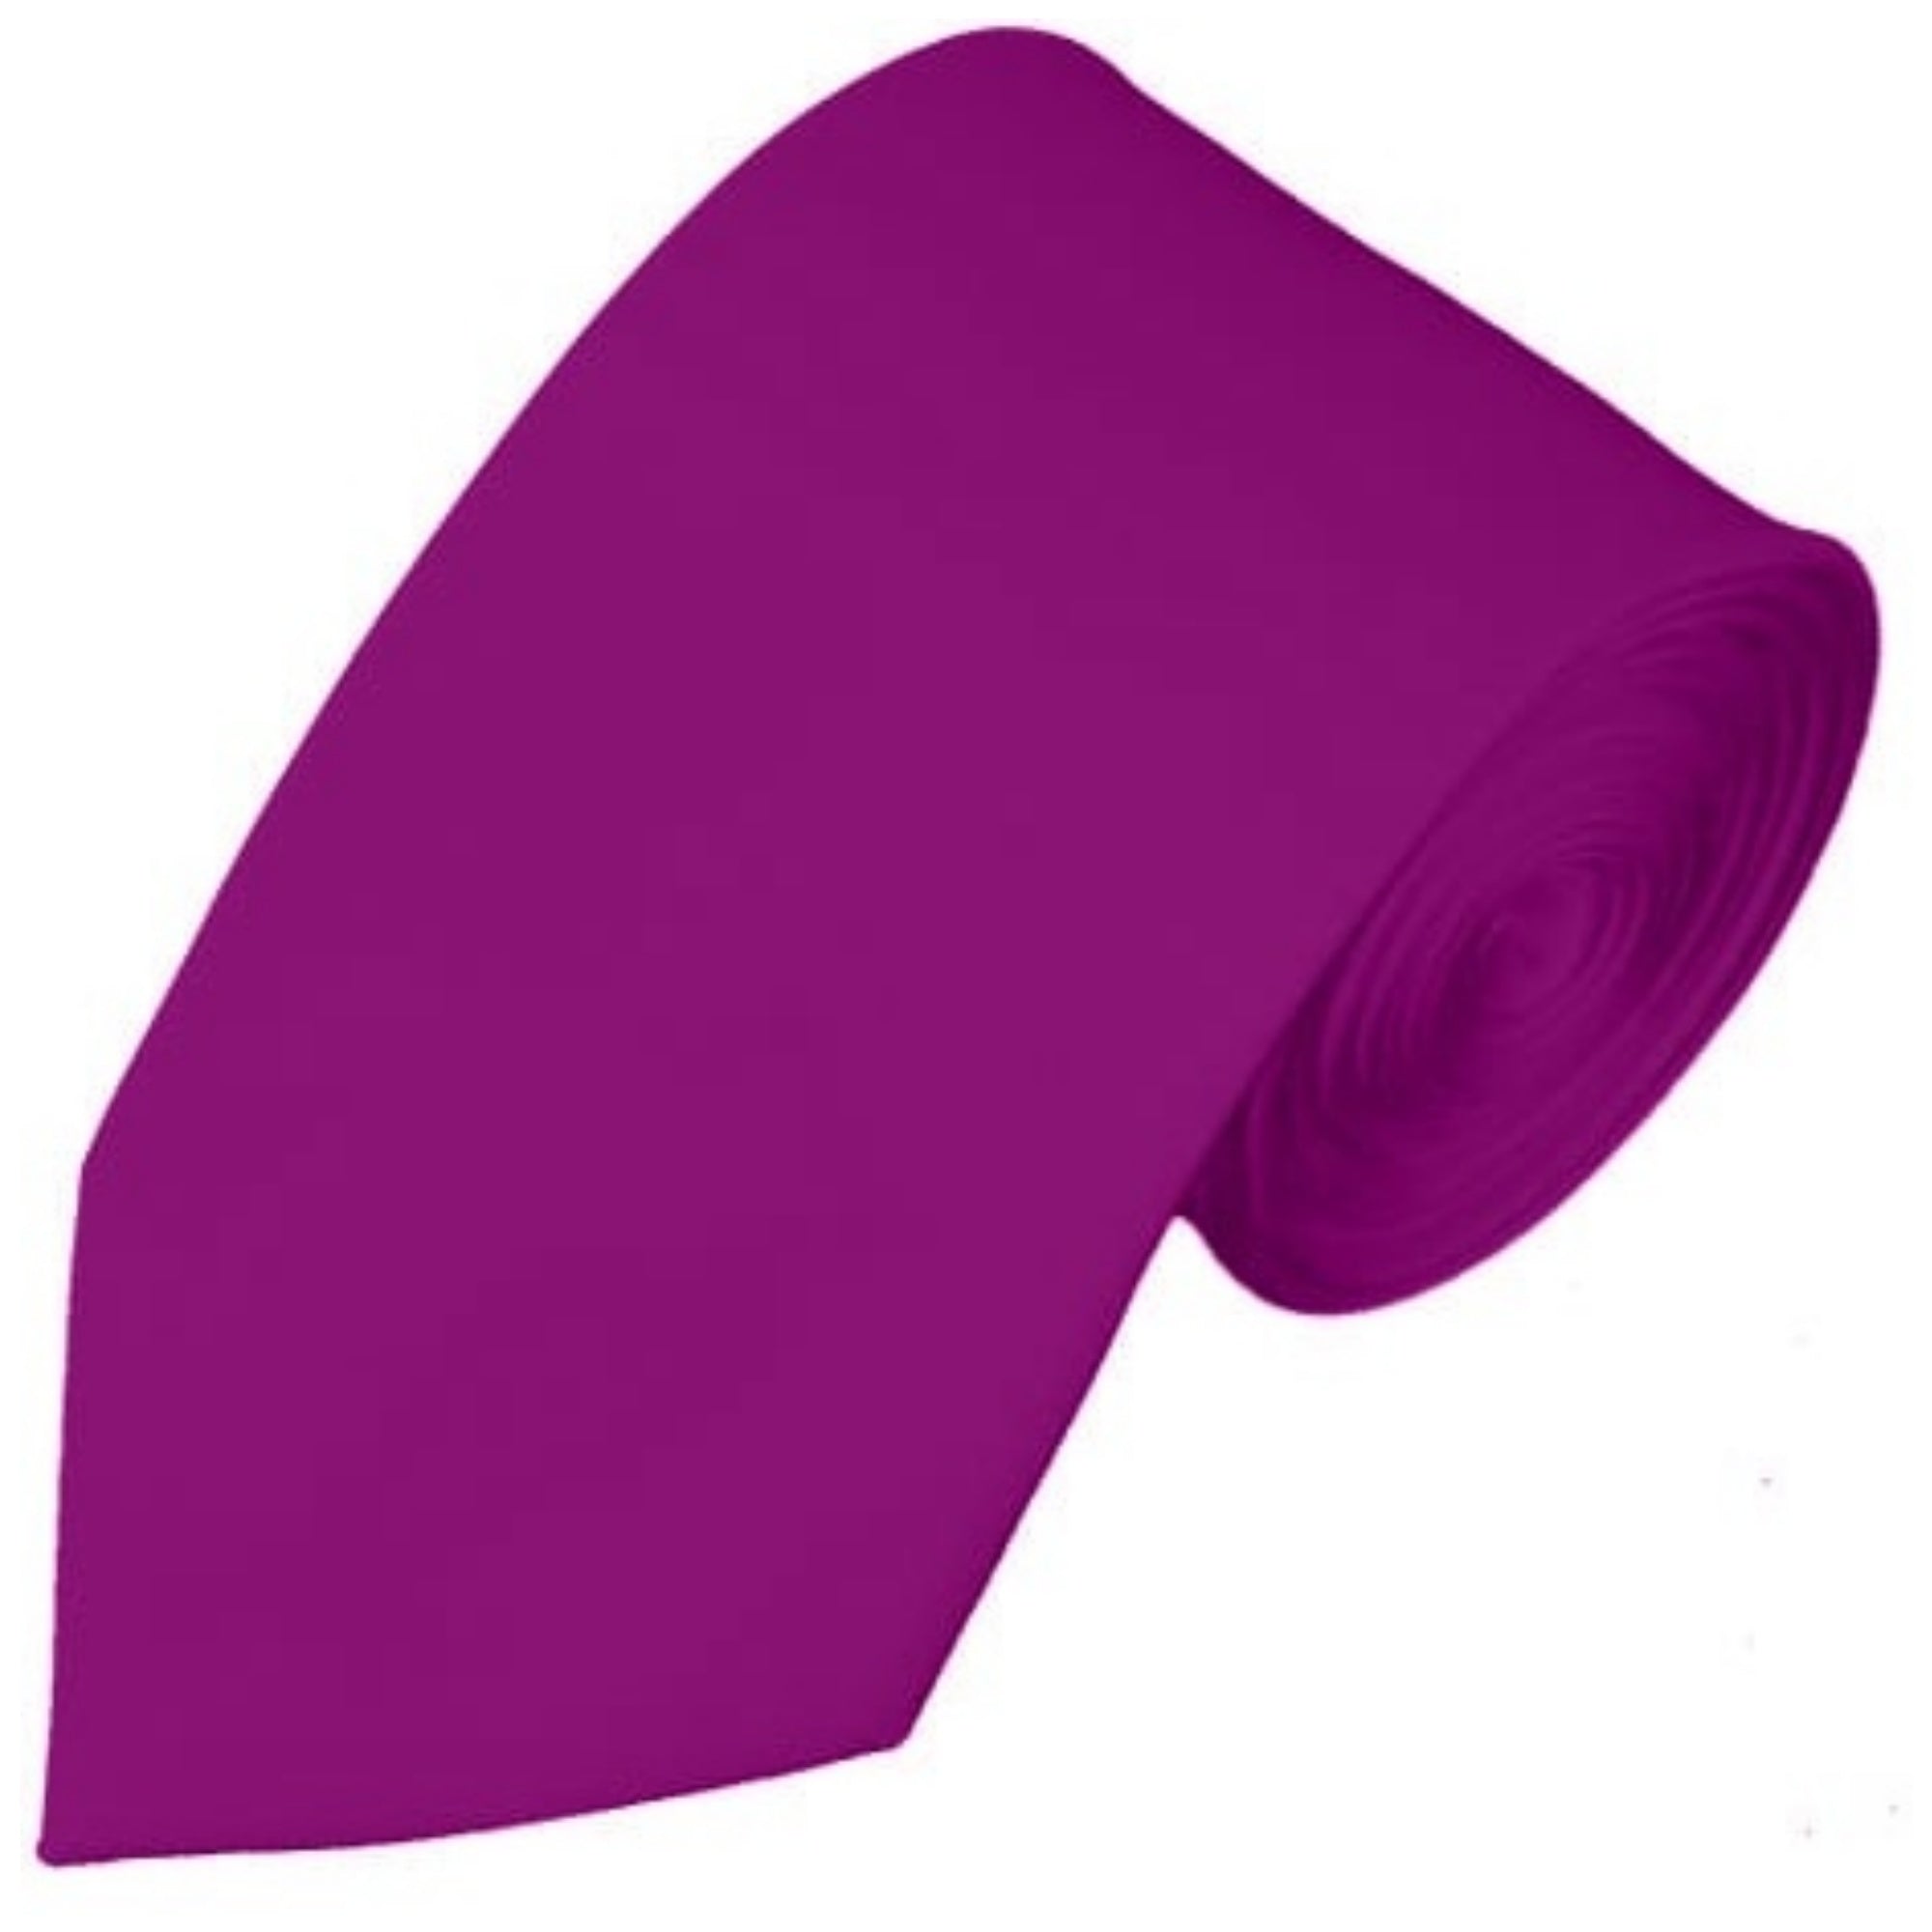 TheDapperTie Men's Solid Color Slim 2.75 Inch Wide And 58 Inch Long Neckties Neck Tie TheDapperTie Violet  